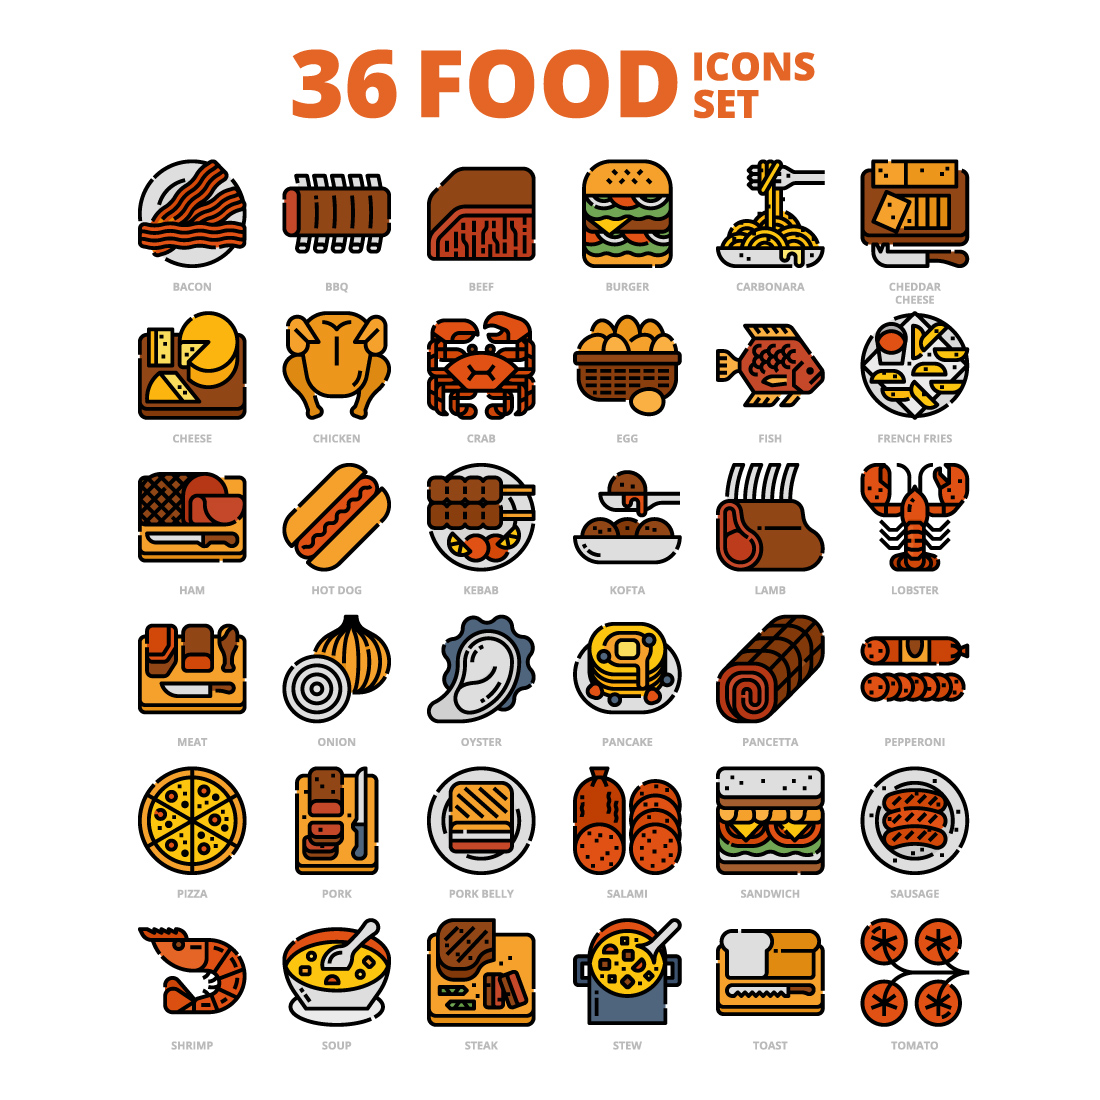 36 Foods Icons Set x 4 Styles cover image.